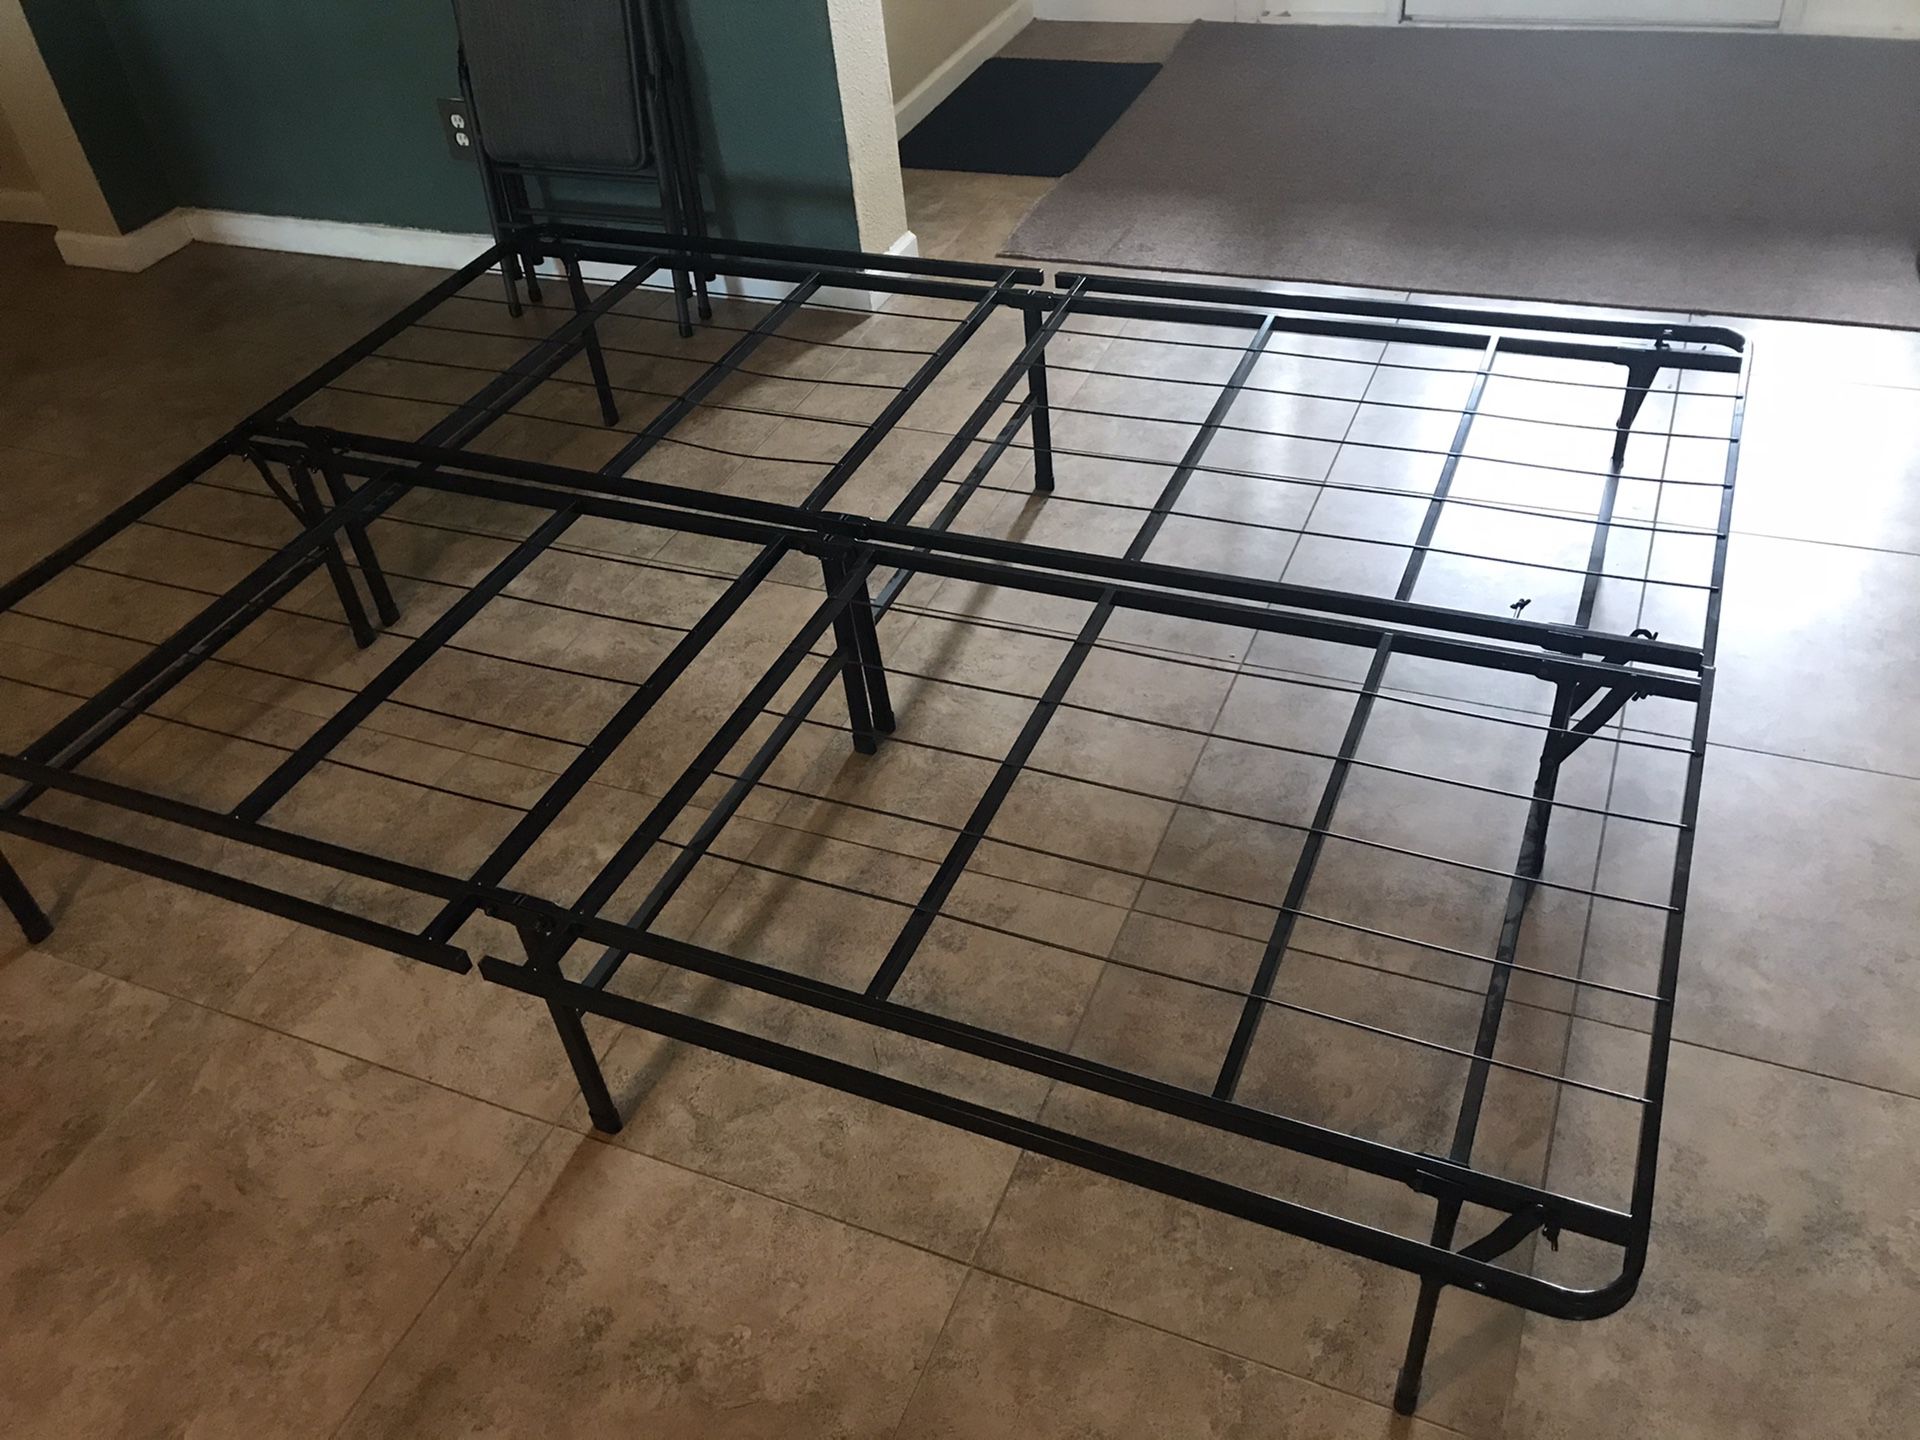 Like New Queen Bed Frame, great for sleep number bed